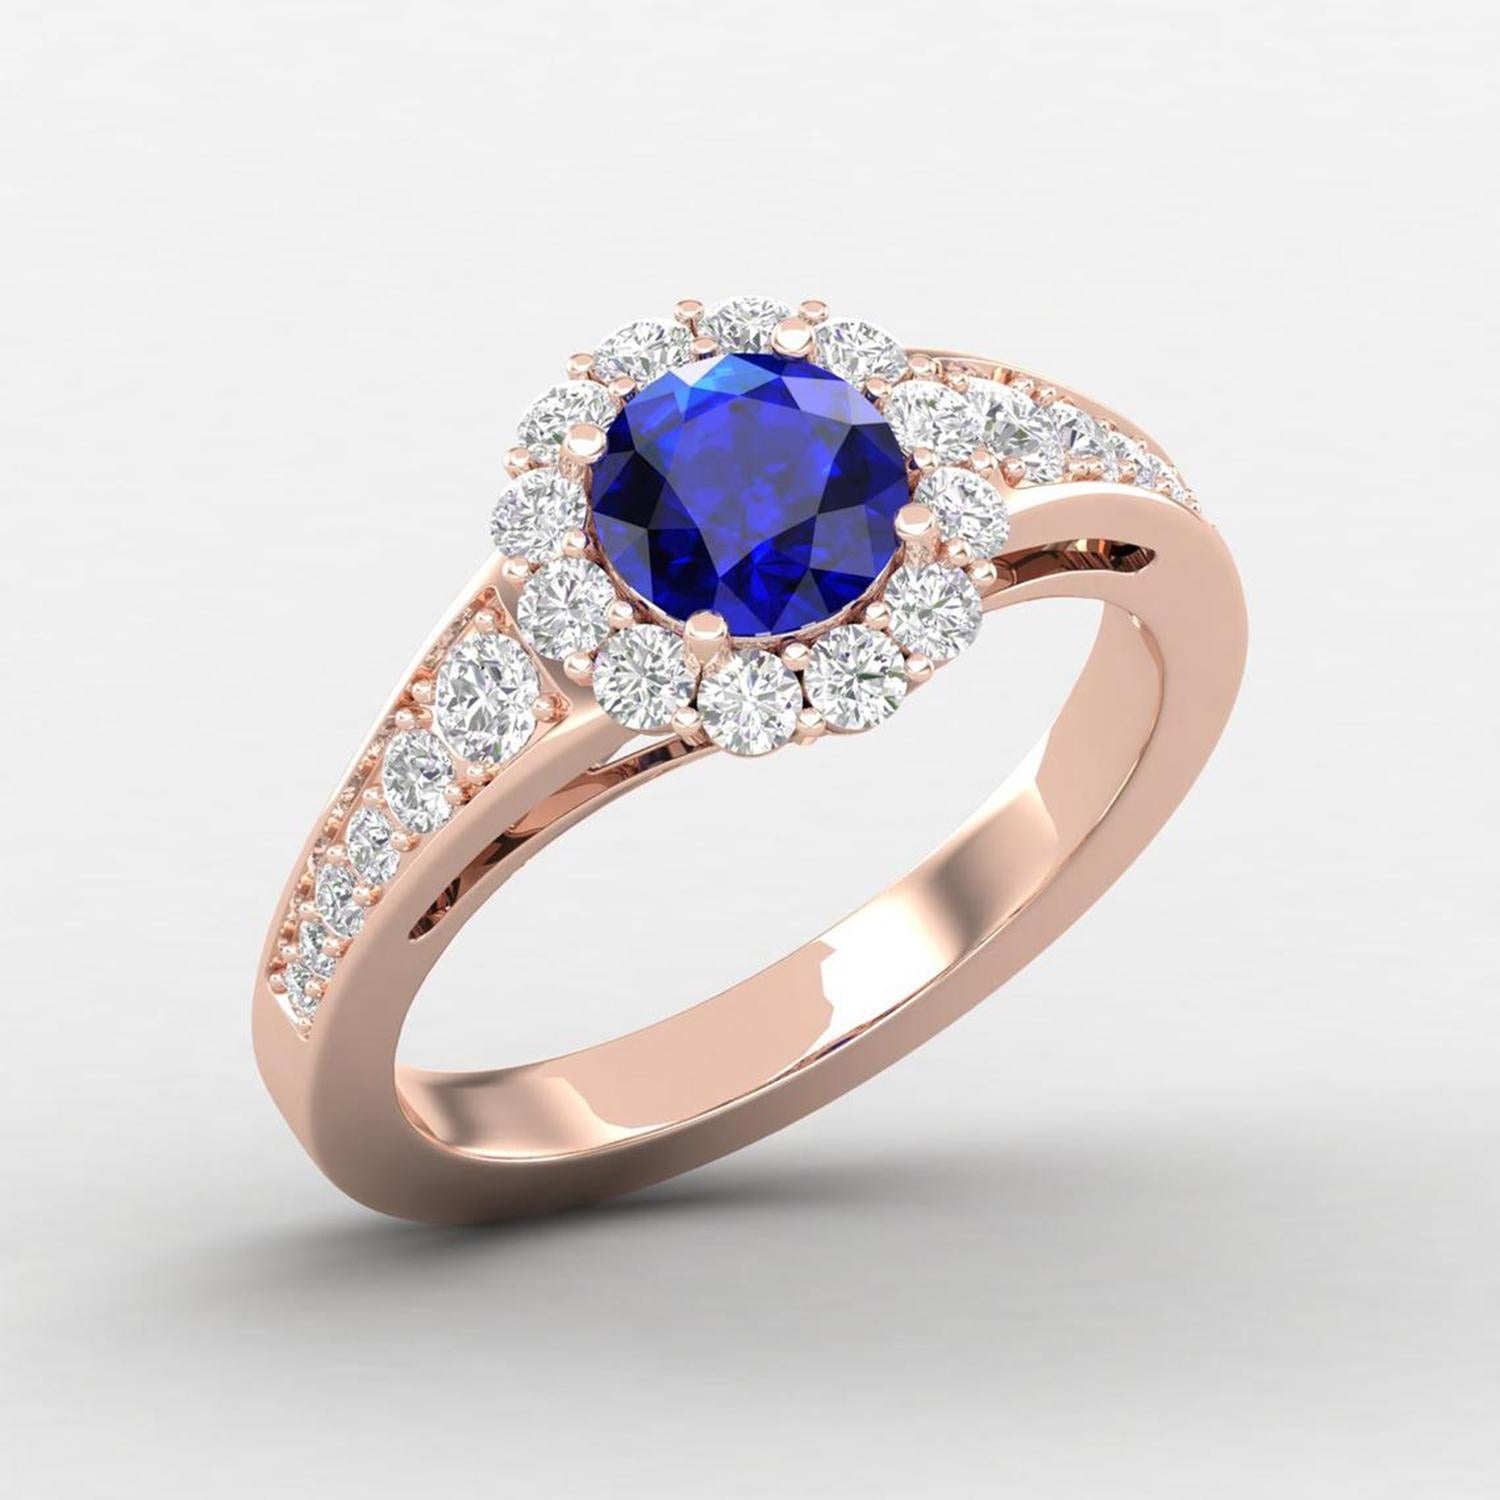 Women's 14 Karat Gold Sapphire Ring / Round Diamond Ring / Solitaire Ring For Sale